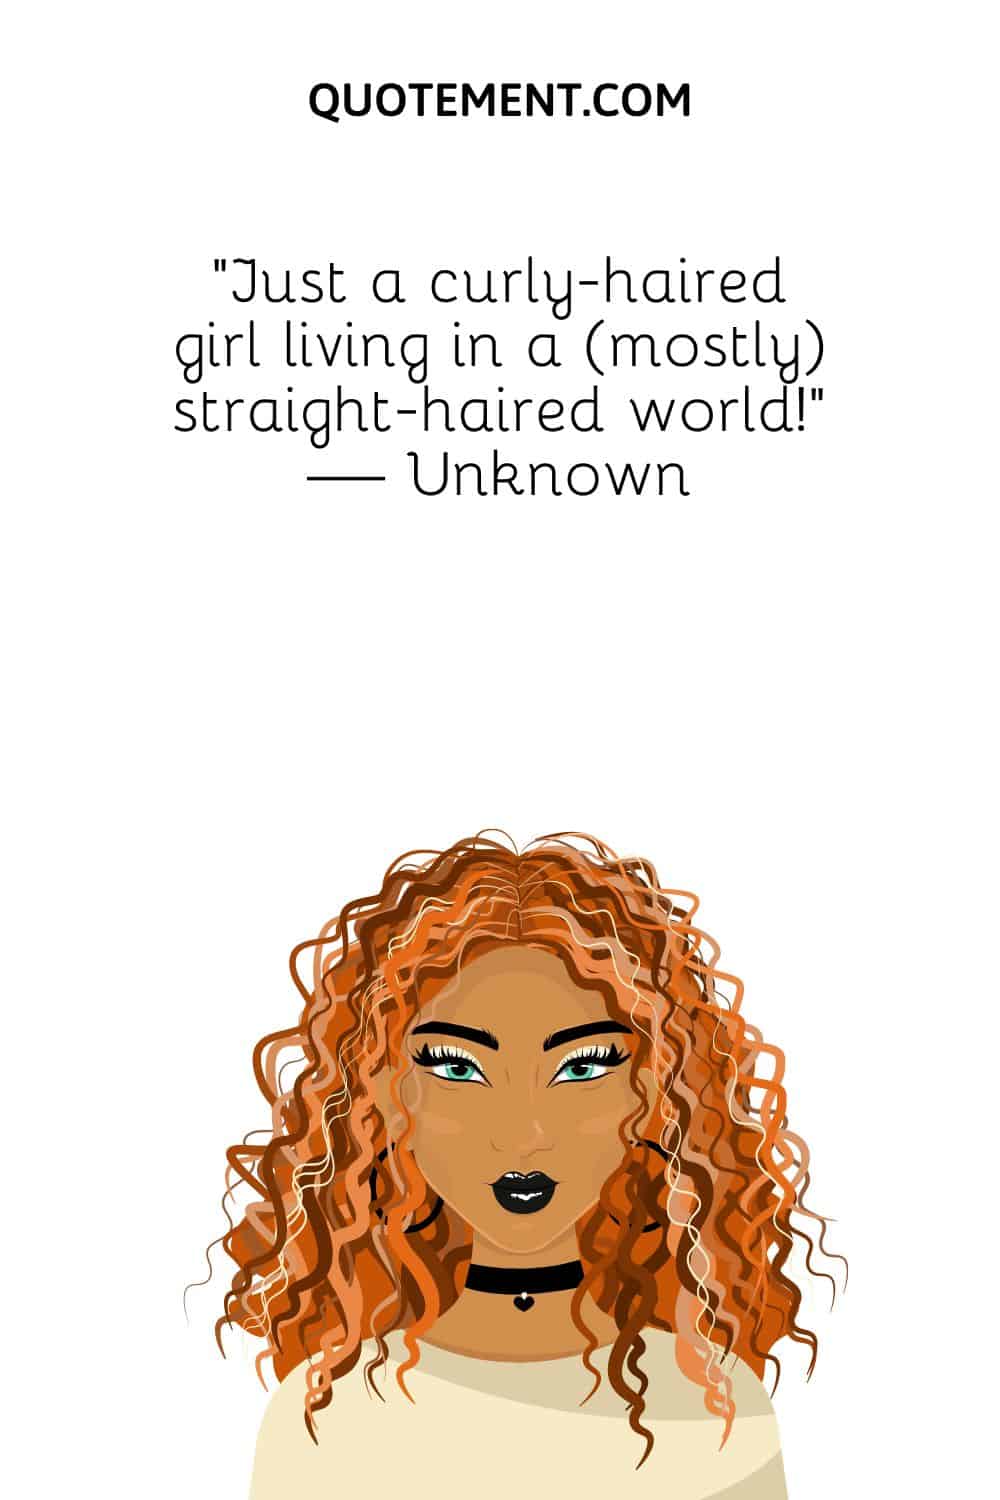 Just a curly-haired girl living in a (mostly) straight-haired world